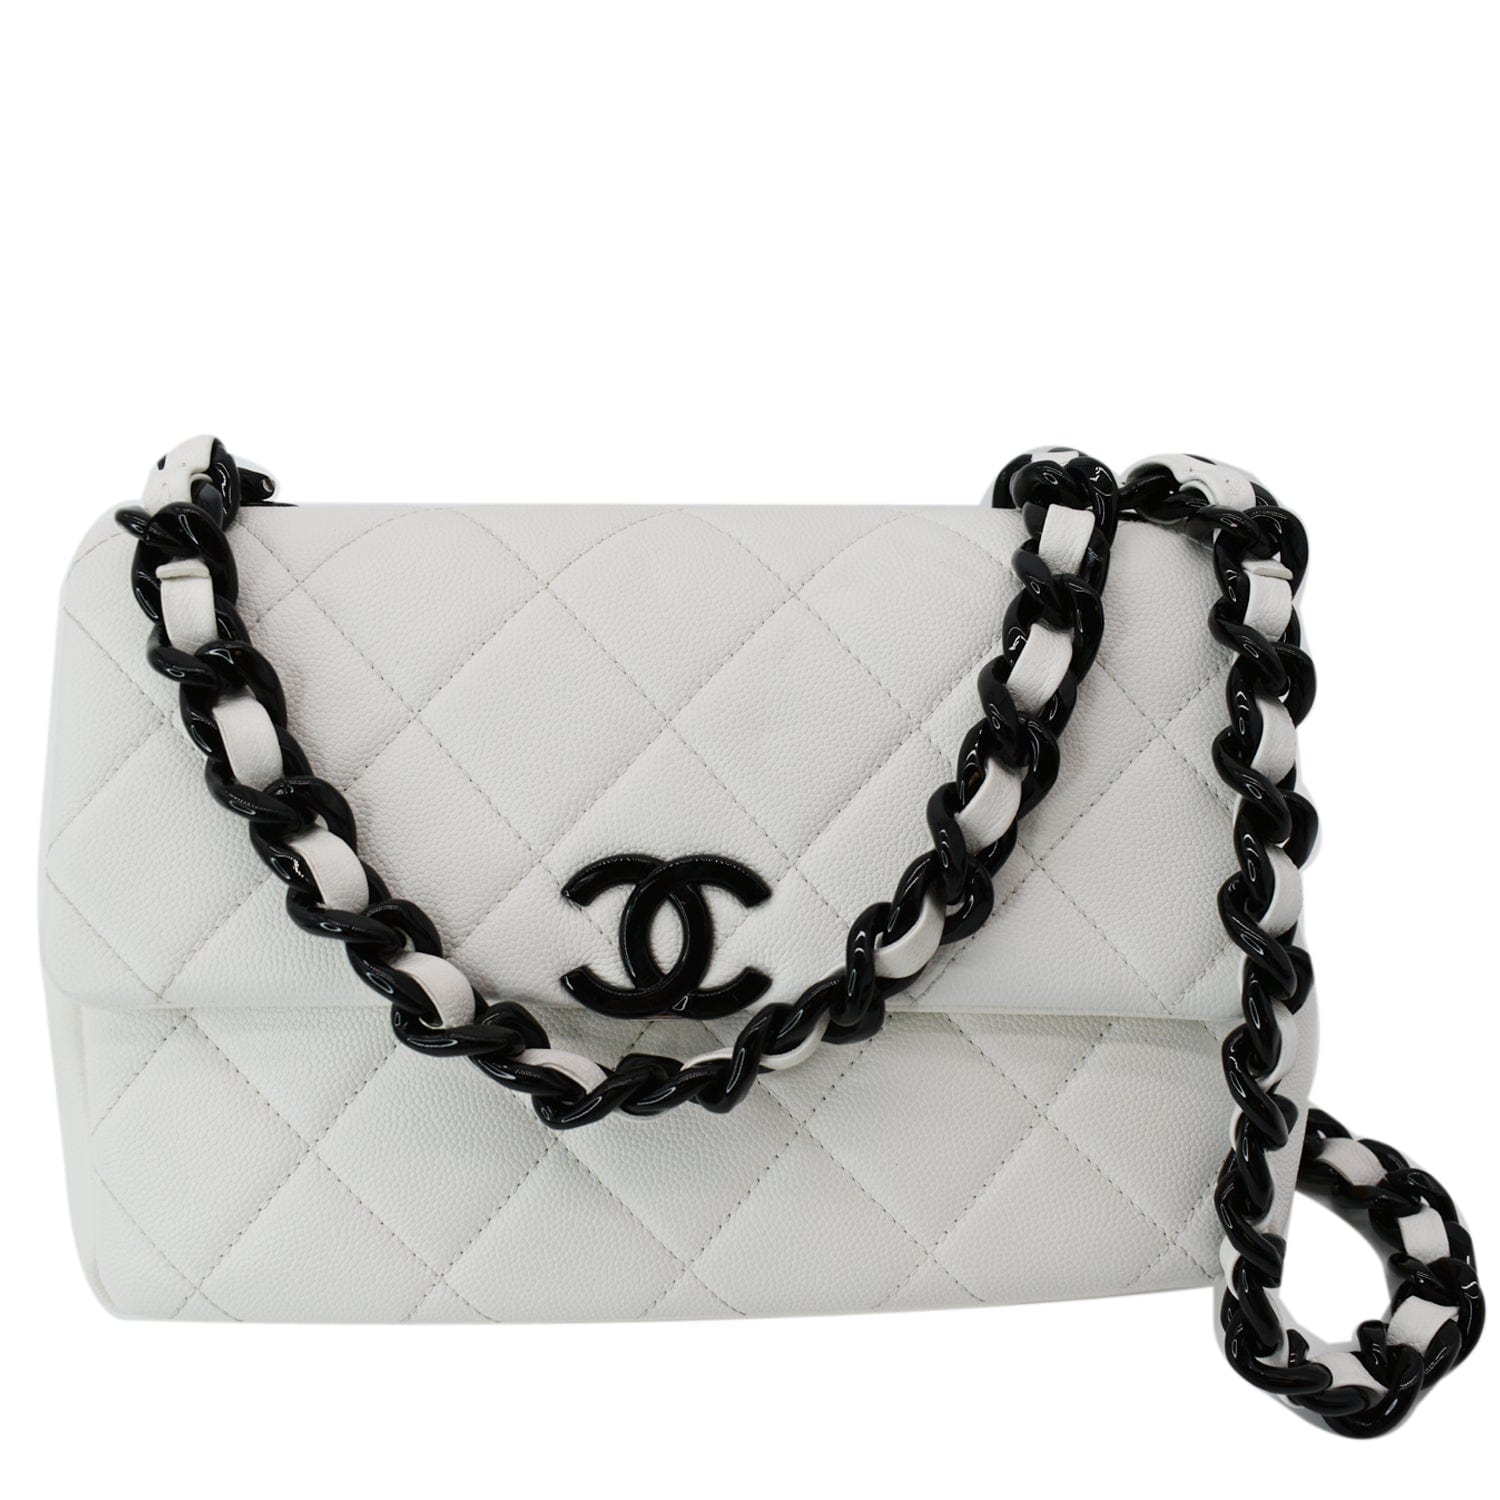 Chanel Black Quilted Leather Braided With Style Small Flap Bag